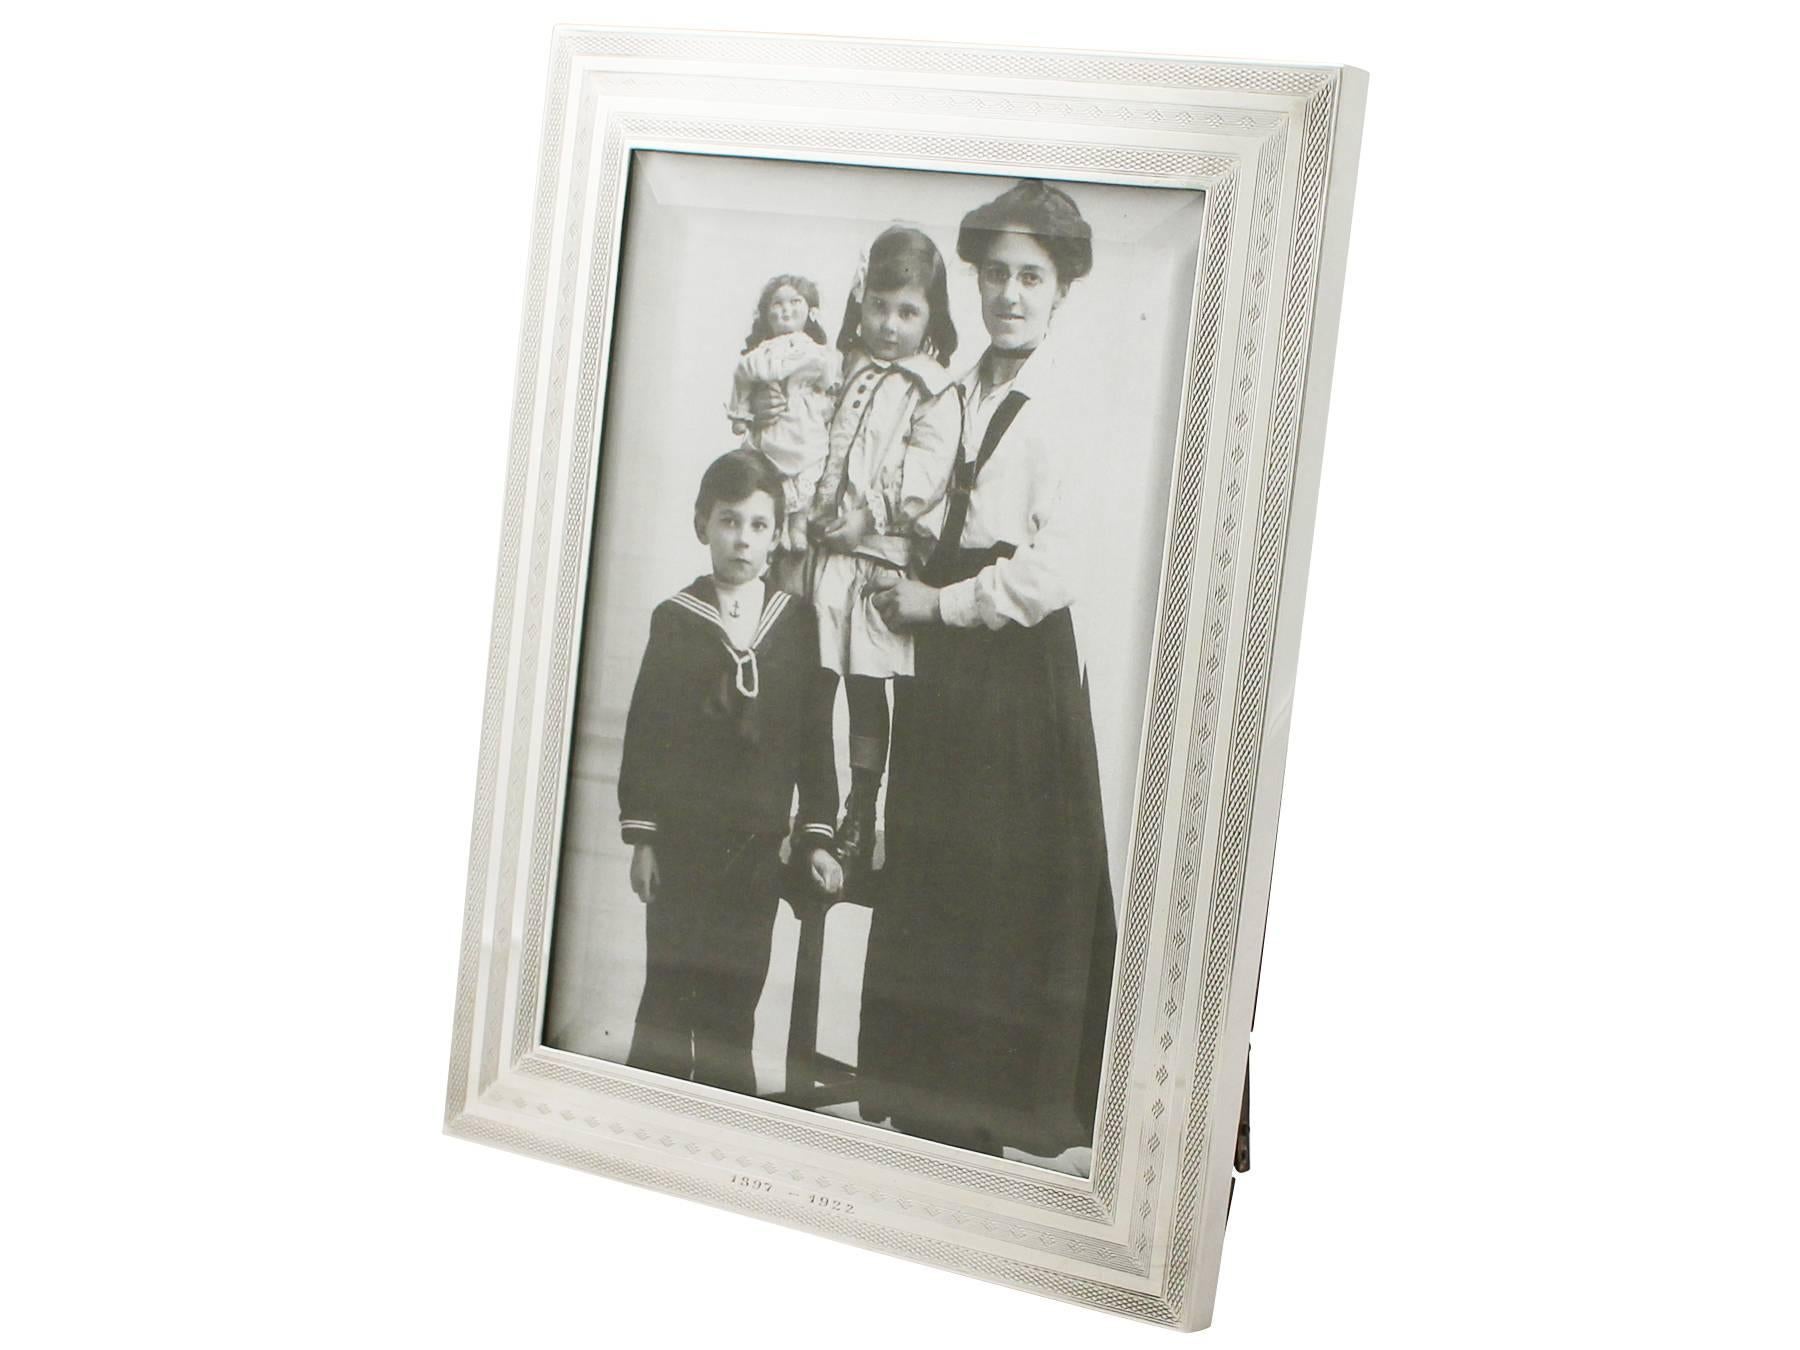 An exceptional, fine and impressive antique George V English sterling silver photograph frame; an addition to our ornamental silverware collection

This exceptional antique George V sterling silver photo frame has a plain rectangular form.

The